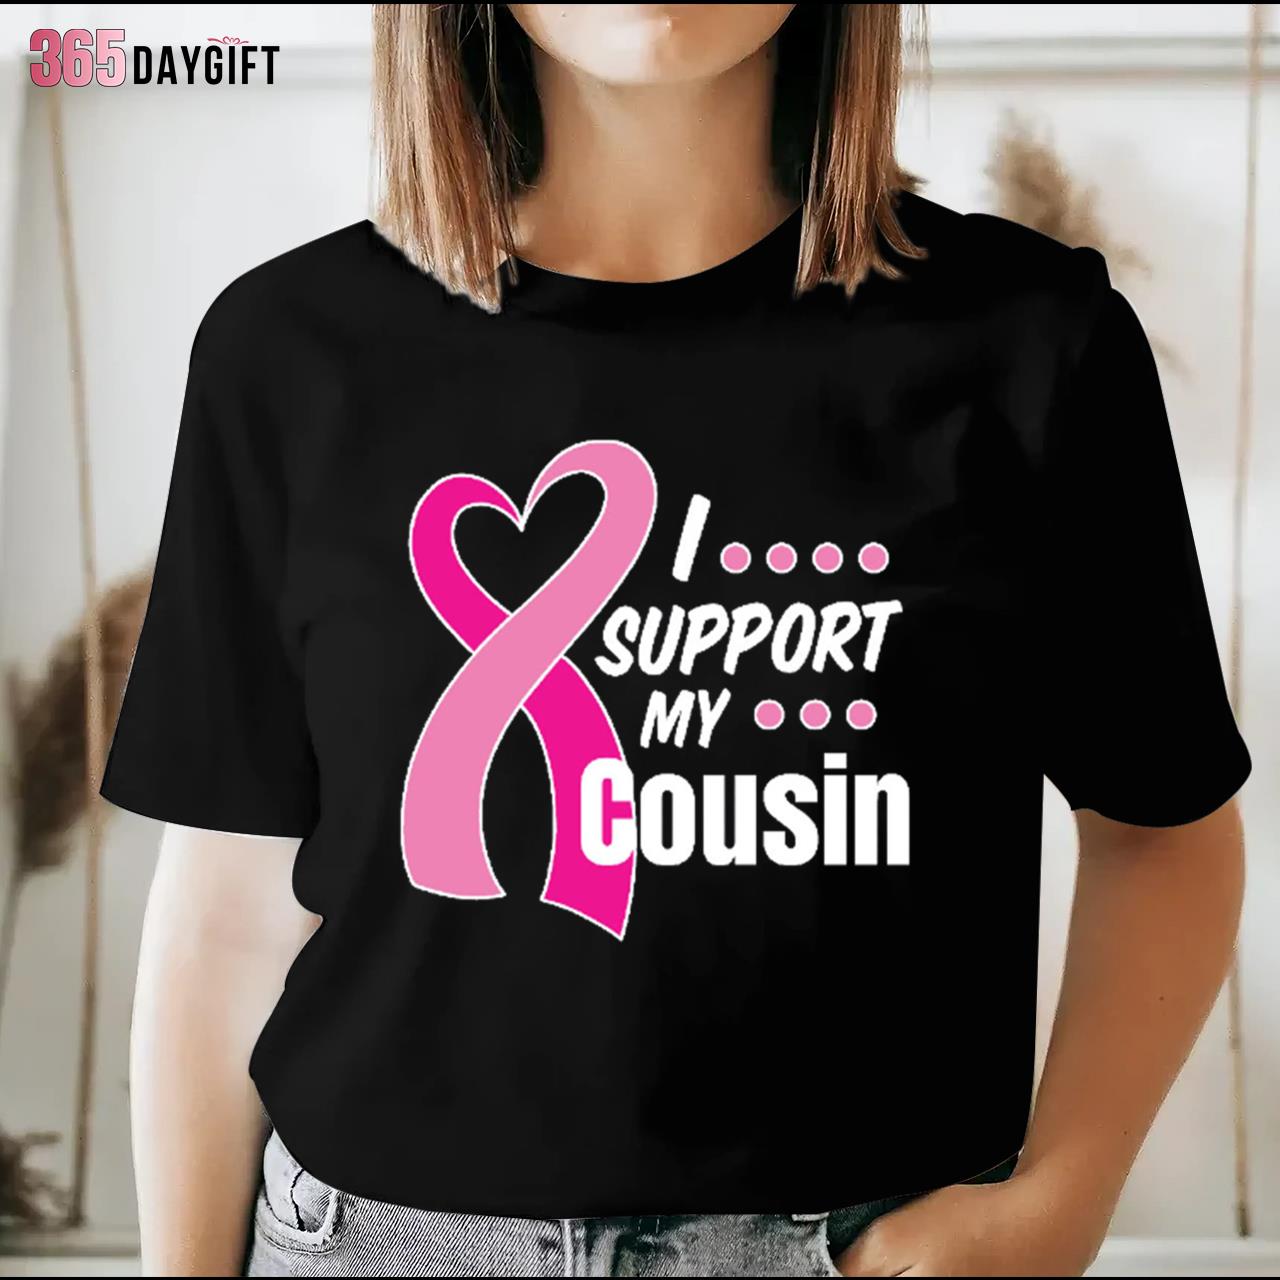 Breast Cancer Awareness Shirts I Support My Cousin